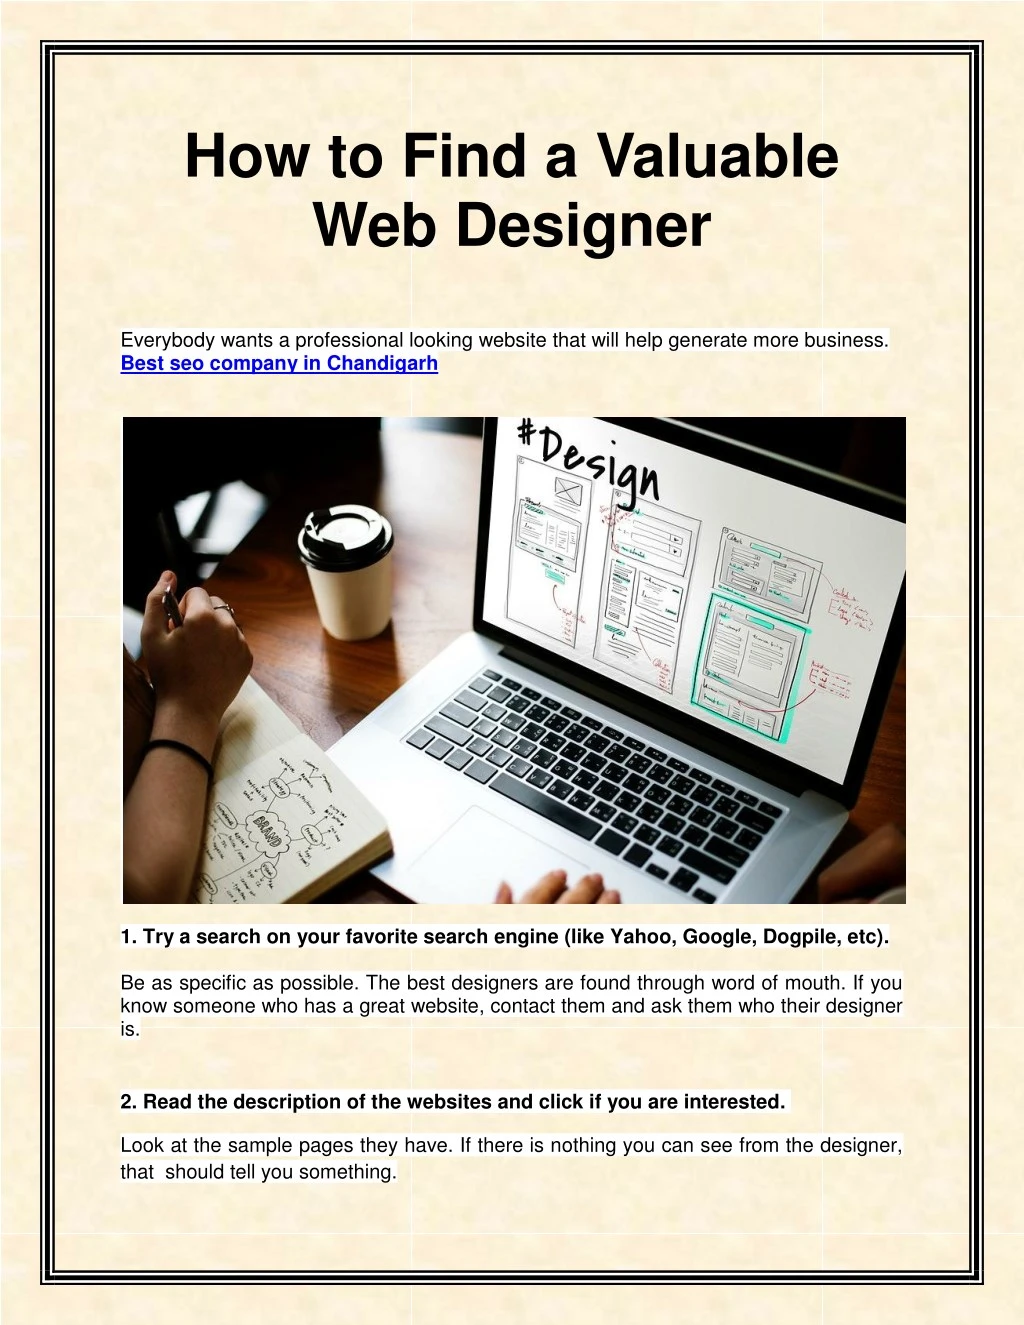 how to find a valuable web designer